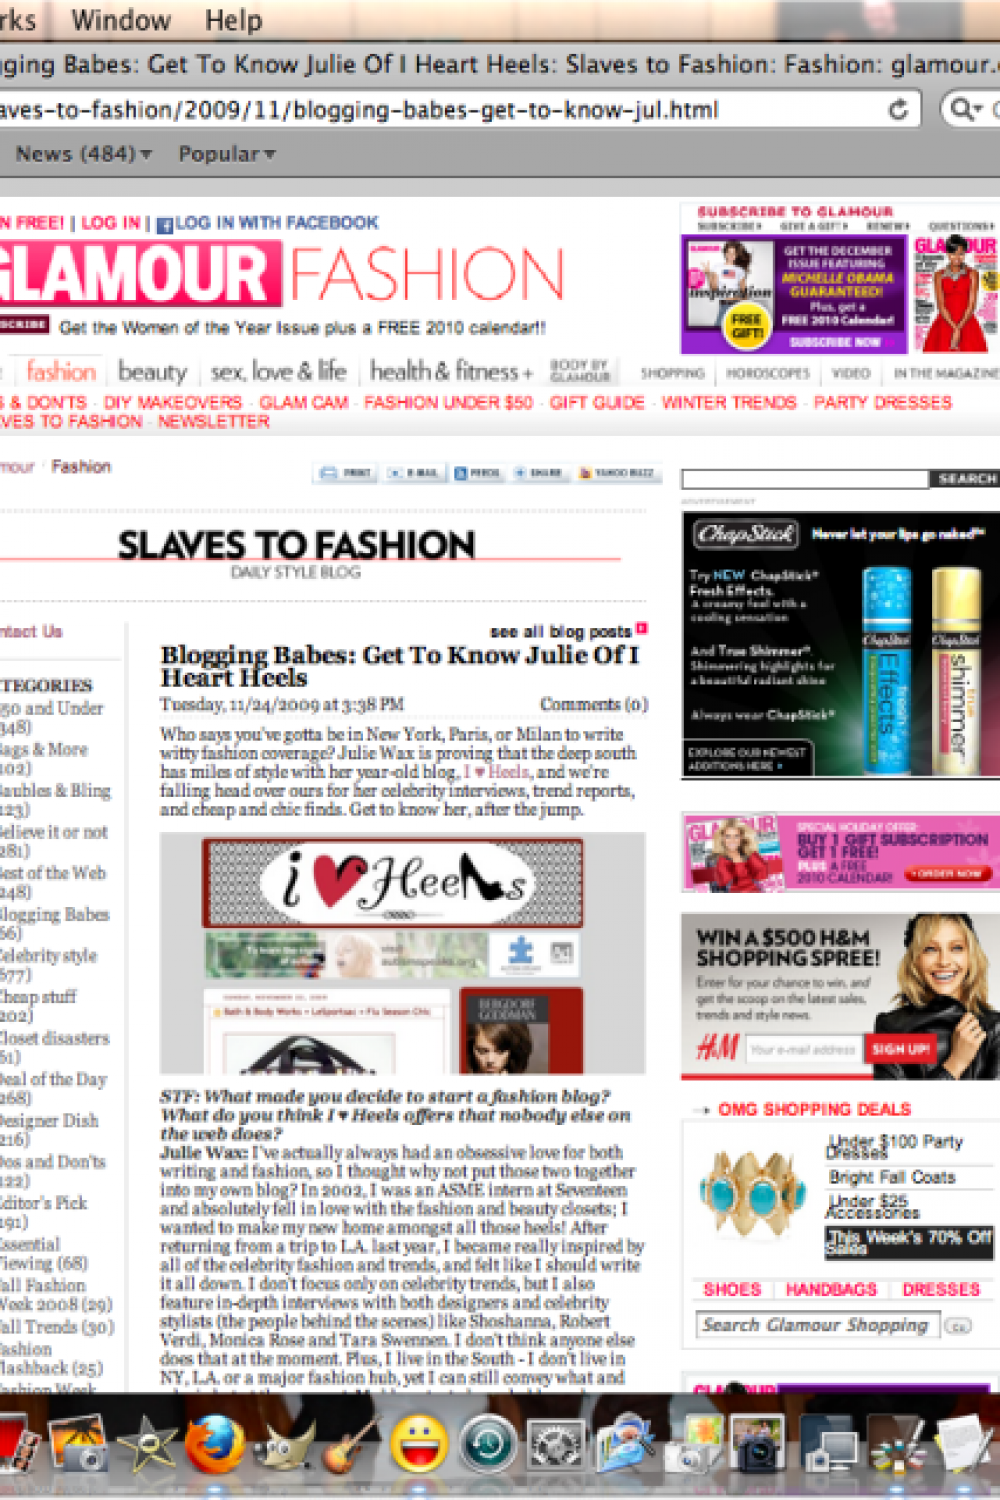 I Heart Heels Featured on Glamour.com!